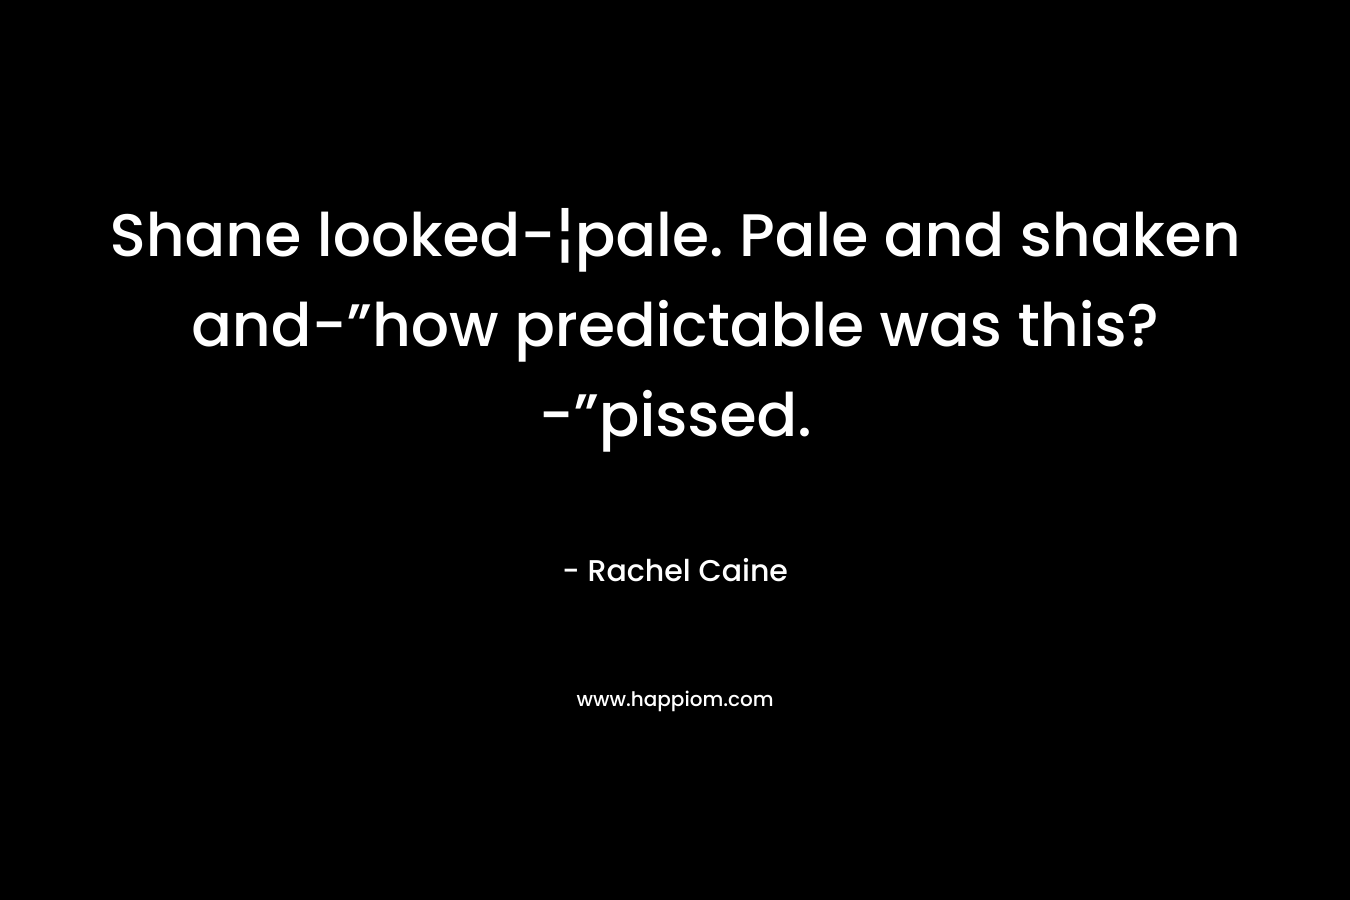 Shane looked-¦pale. Pale and shaken and-”how predictable was this?-”pissed. – Rachel Caine